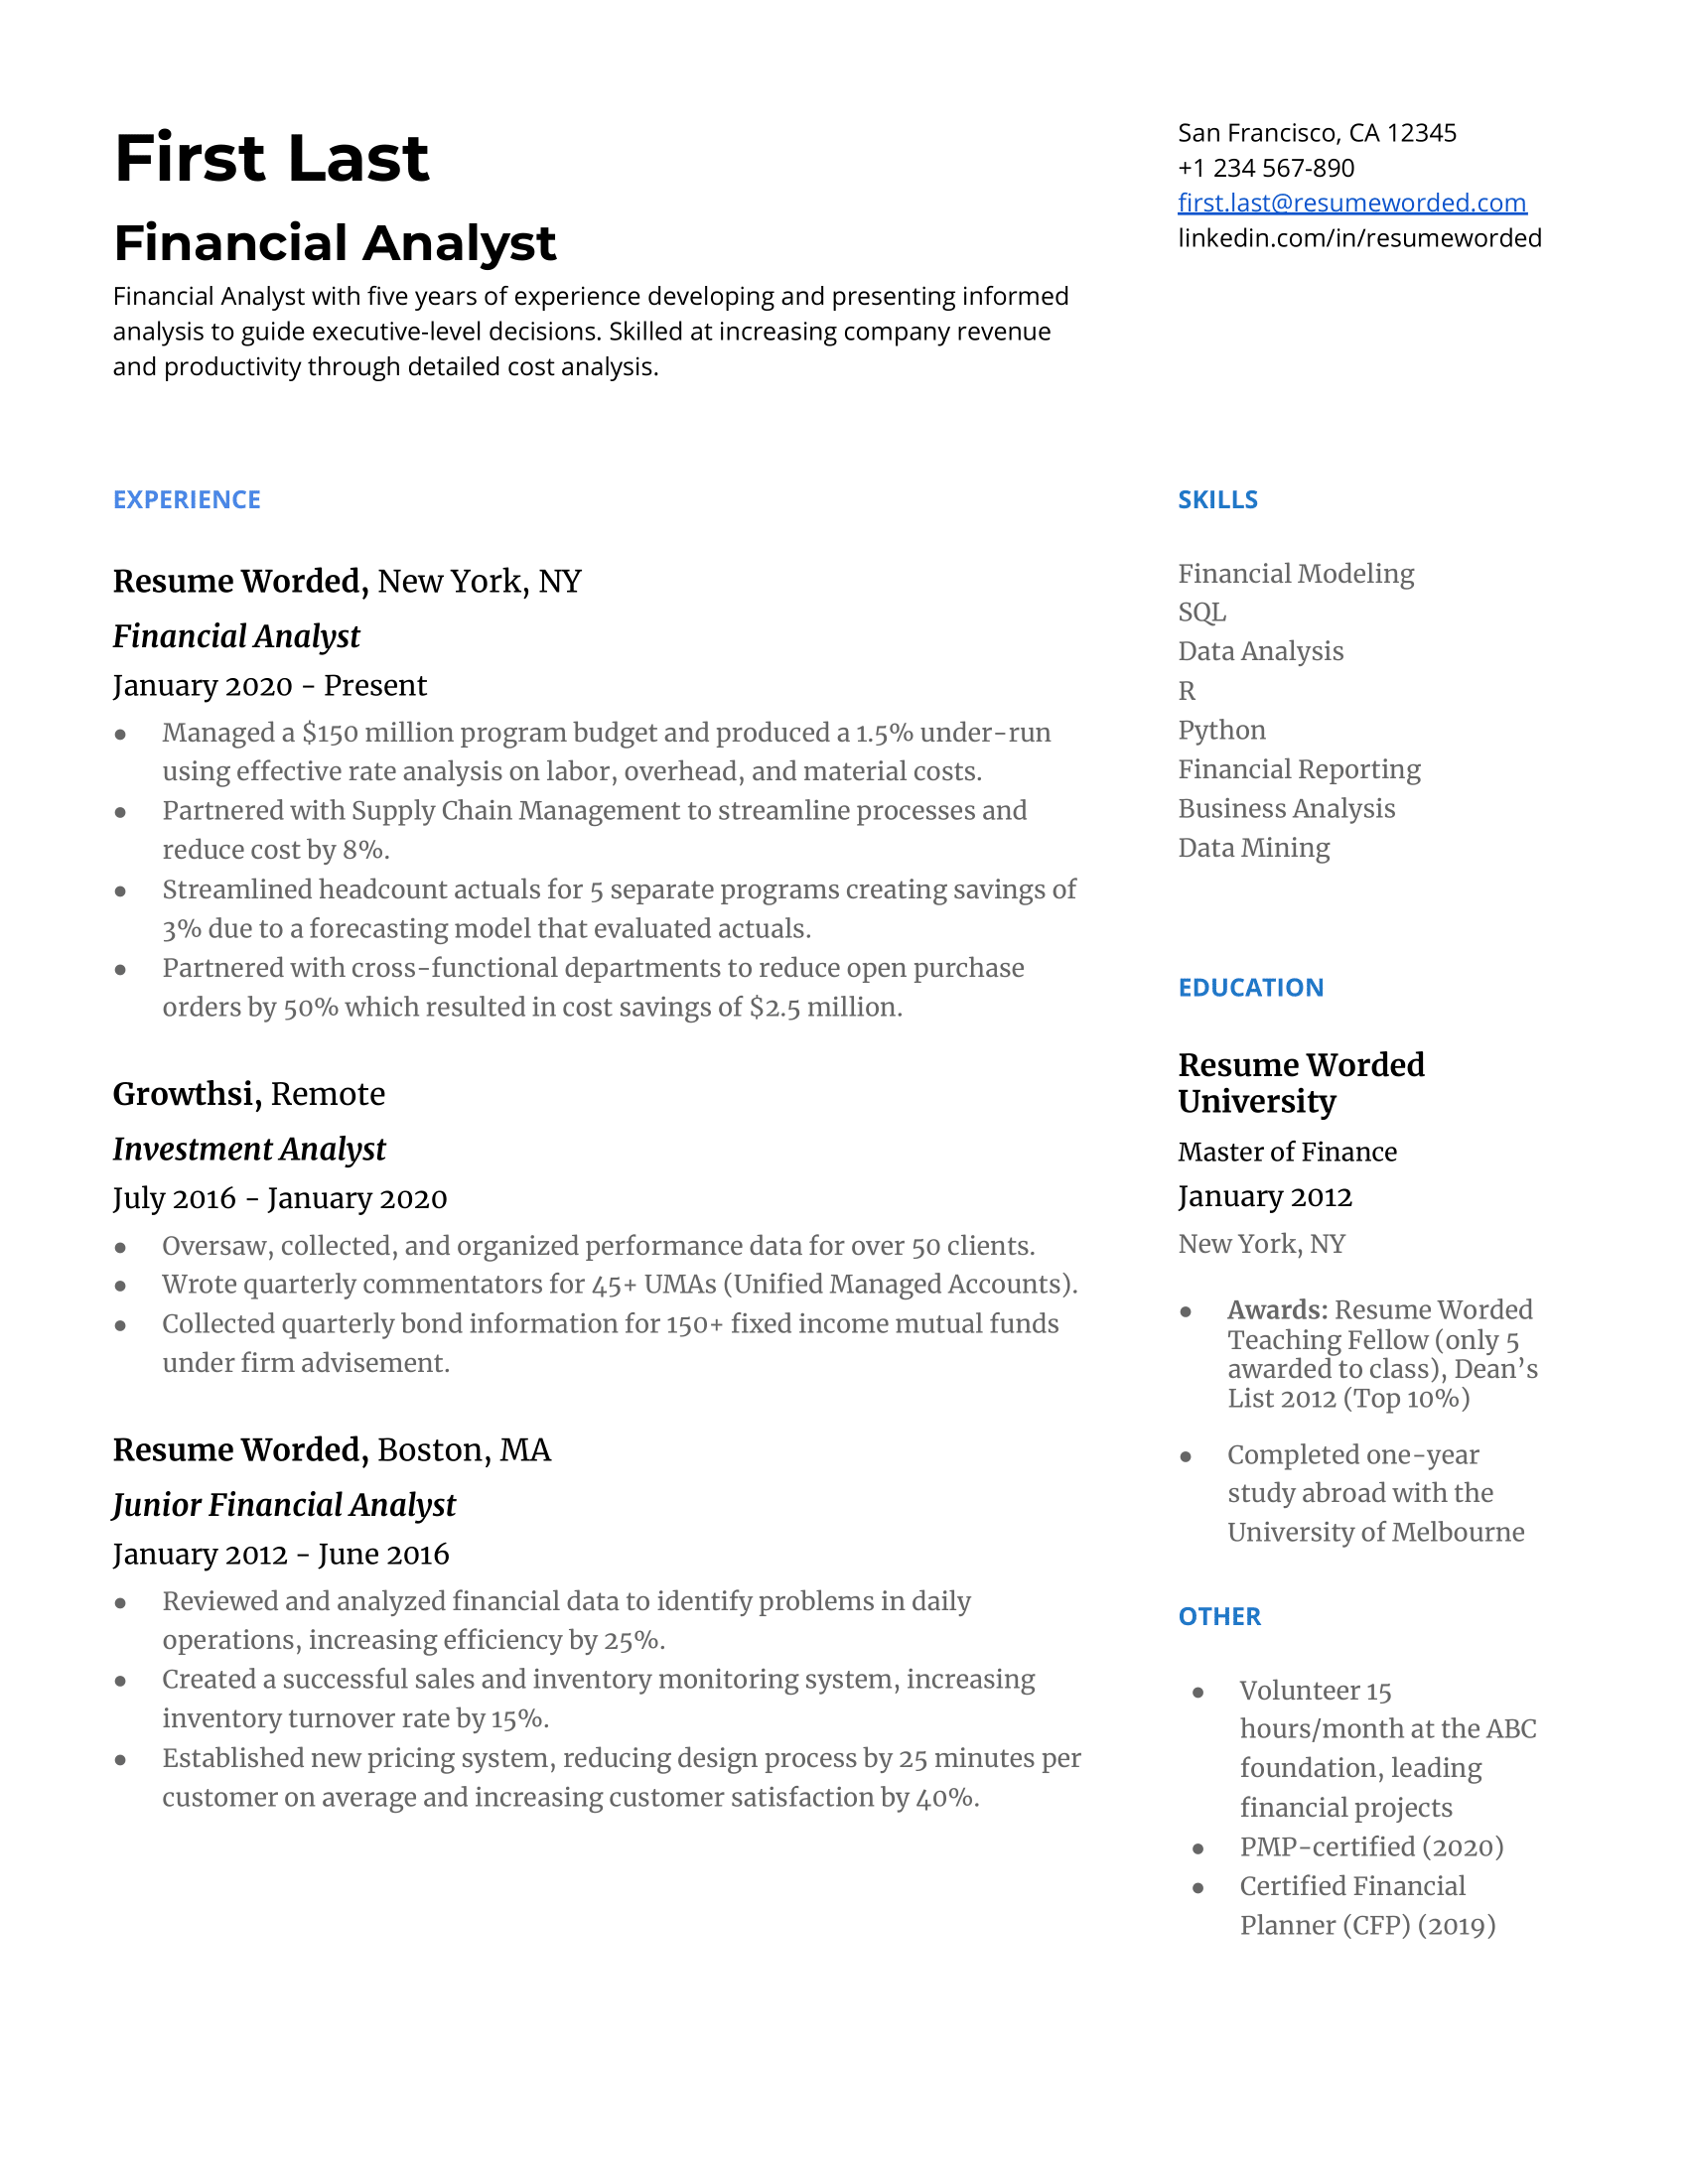 A resume for a financial analyst with a master's degree in finance and experience as an investment analyst.